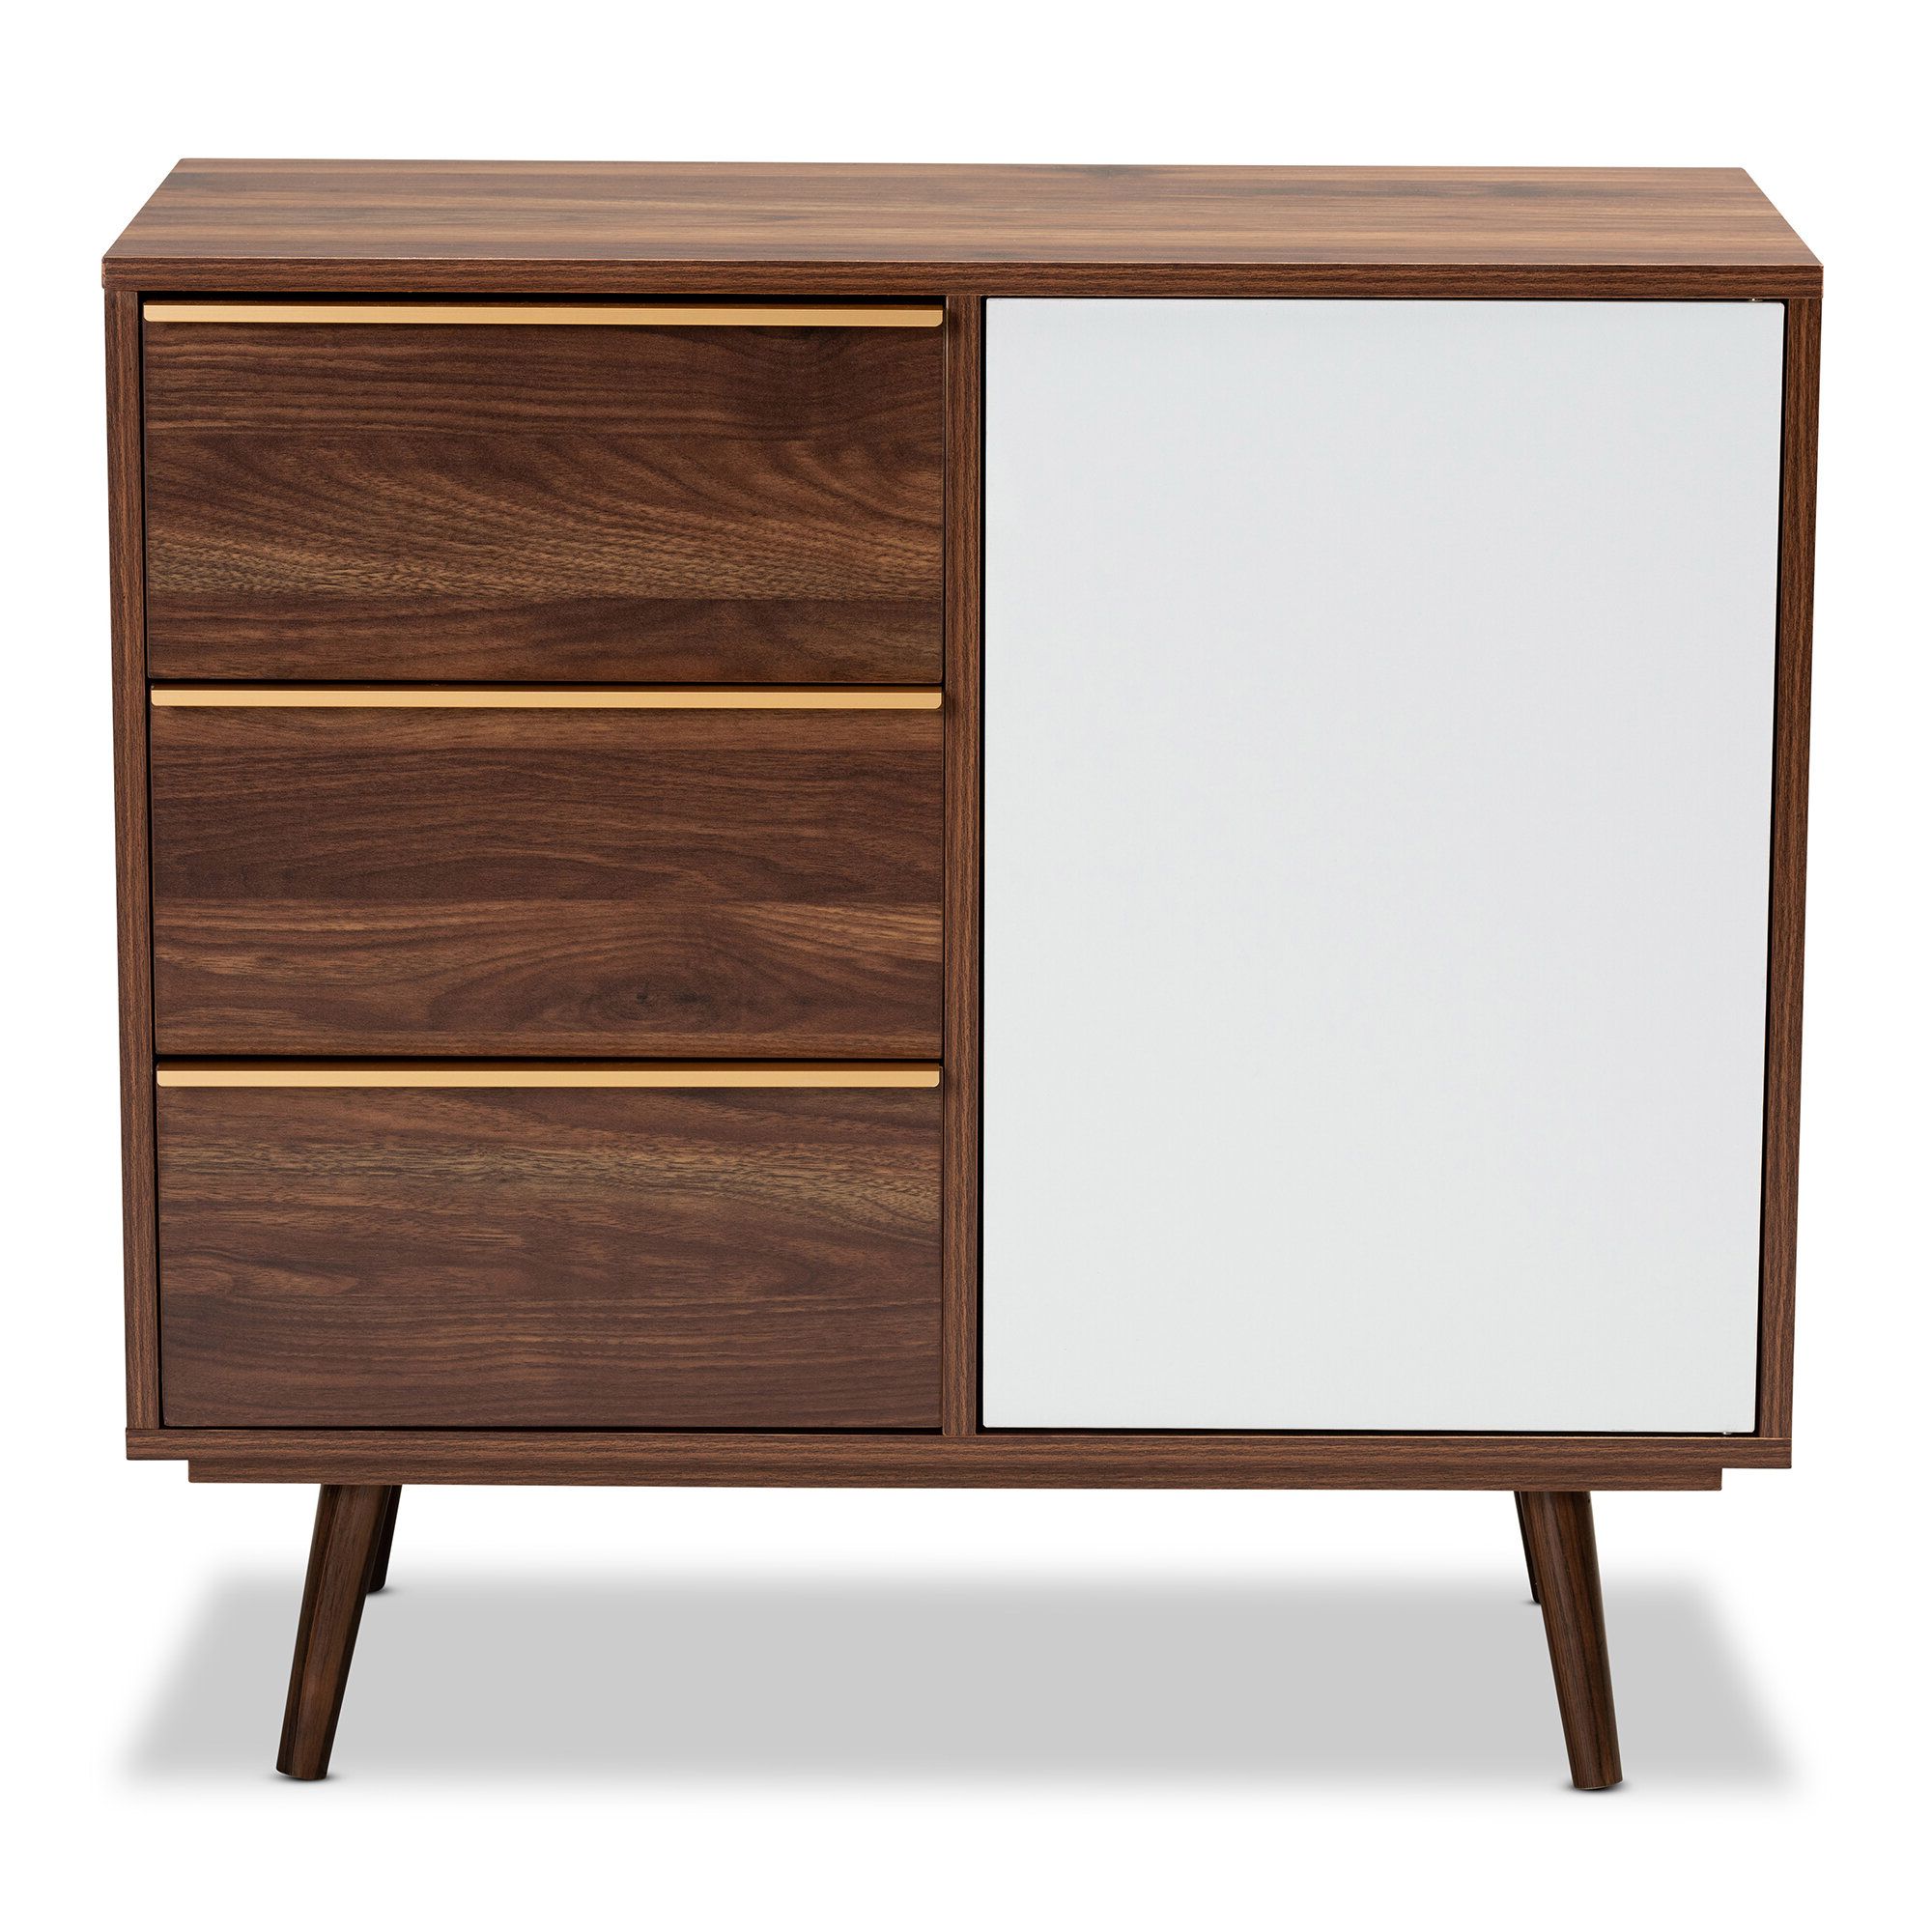 Corrigan Studio® Analisia Mid Century Modern Two Tone Cherry Brown And  White Finished Wood 2 Door Sideboard Buffet | Wayfair With Brown Finished Wood Sideboards (Gallery 20 of 20)